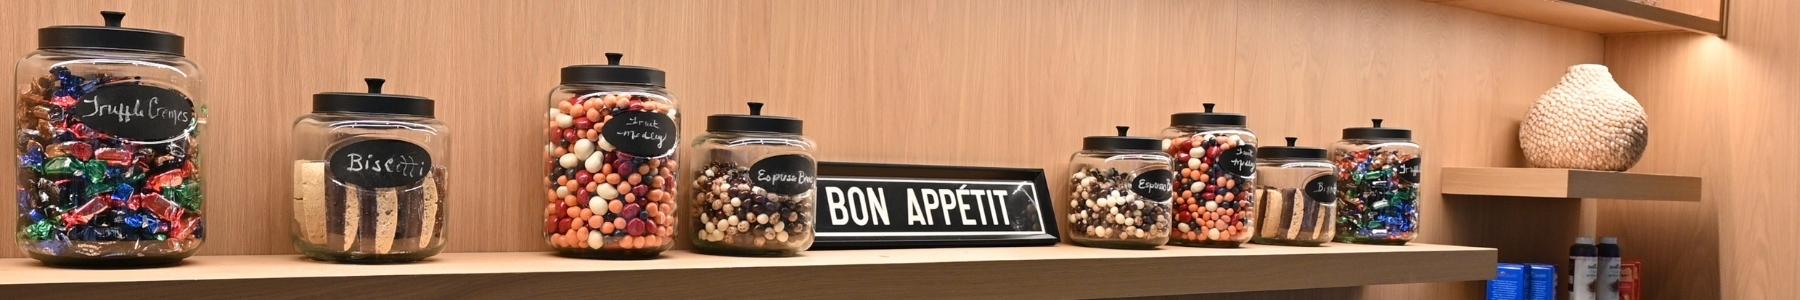 Dilettante Chocolates Bon Appetite sign beside other jars of TruffleCremes, Biscotti, and Chocolate-Covered Fruit